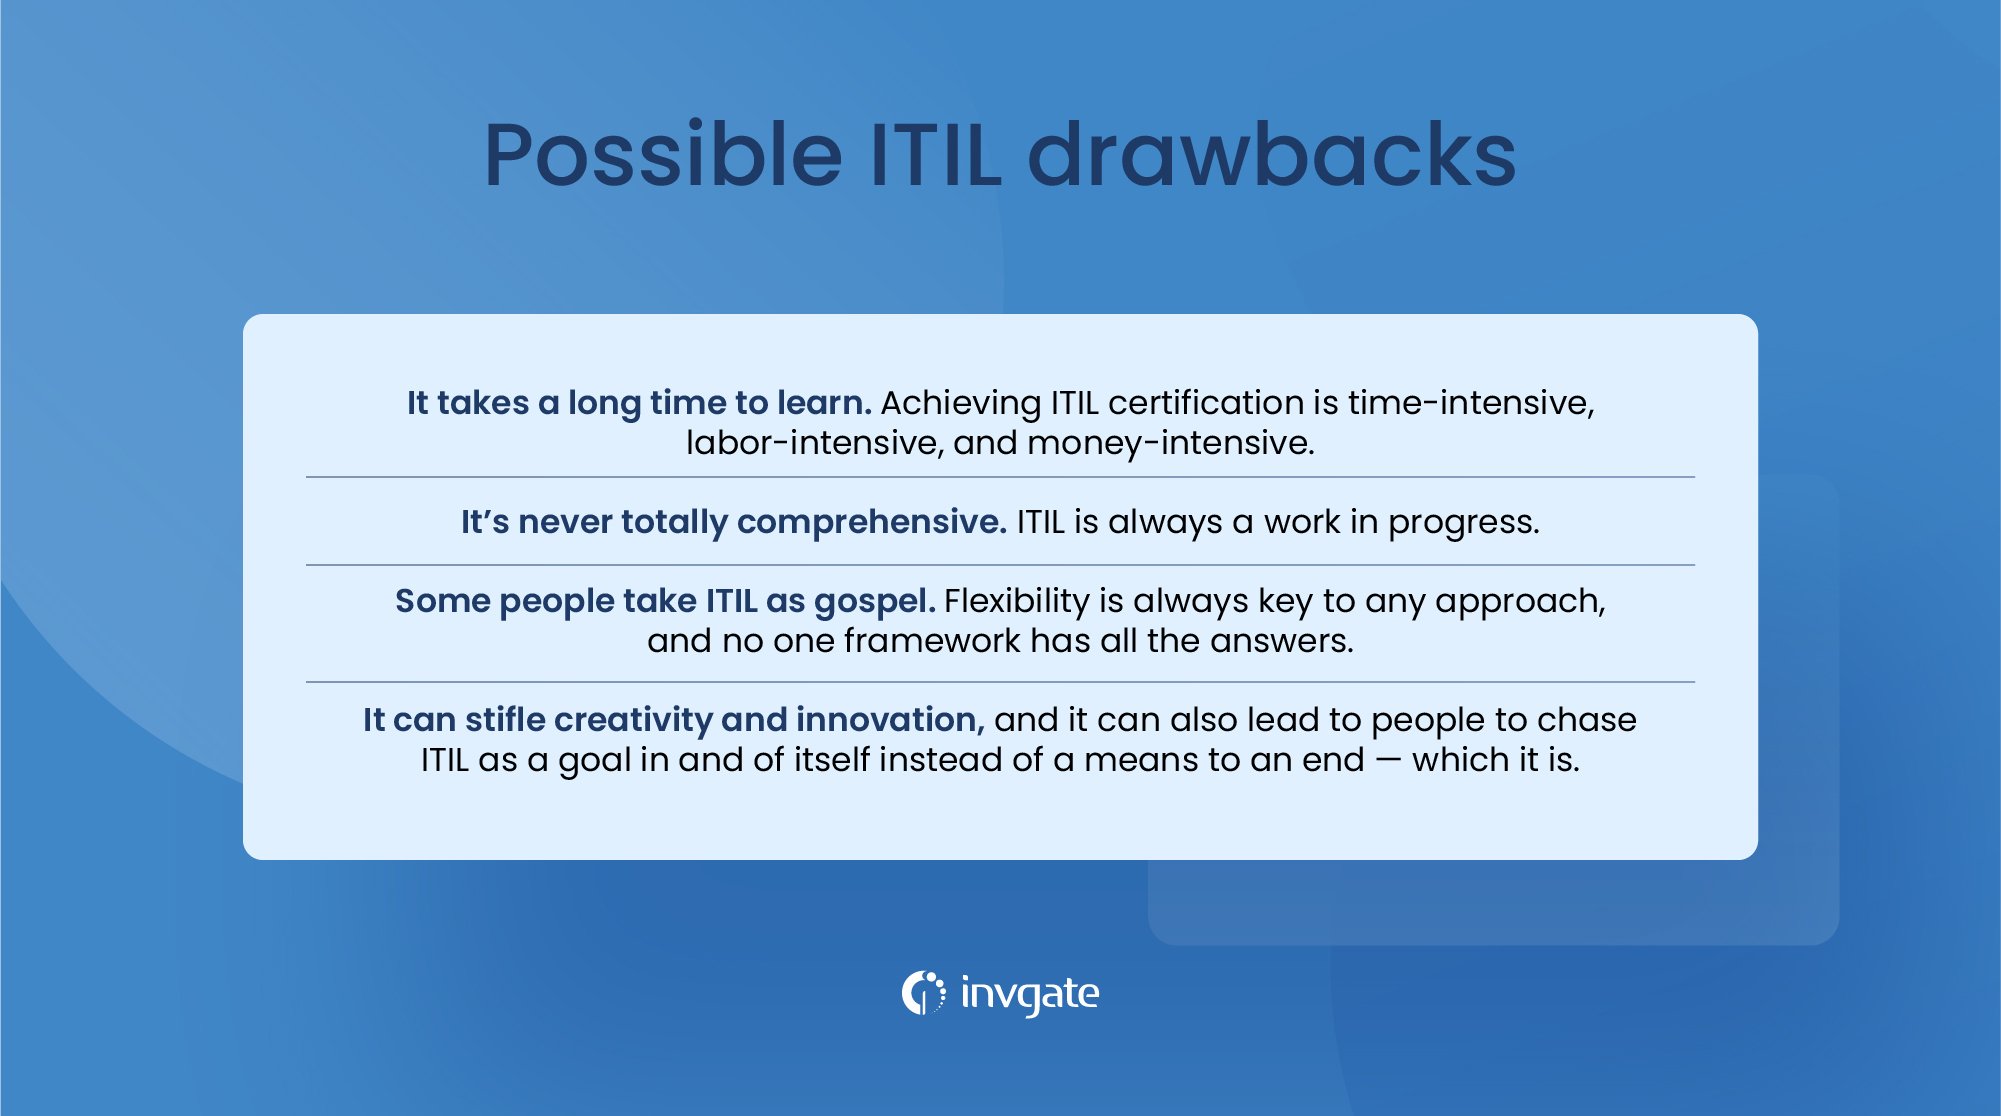 There are many possible ITIL drawbacks